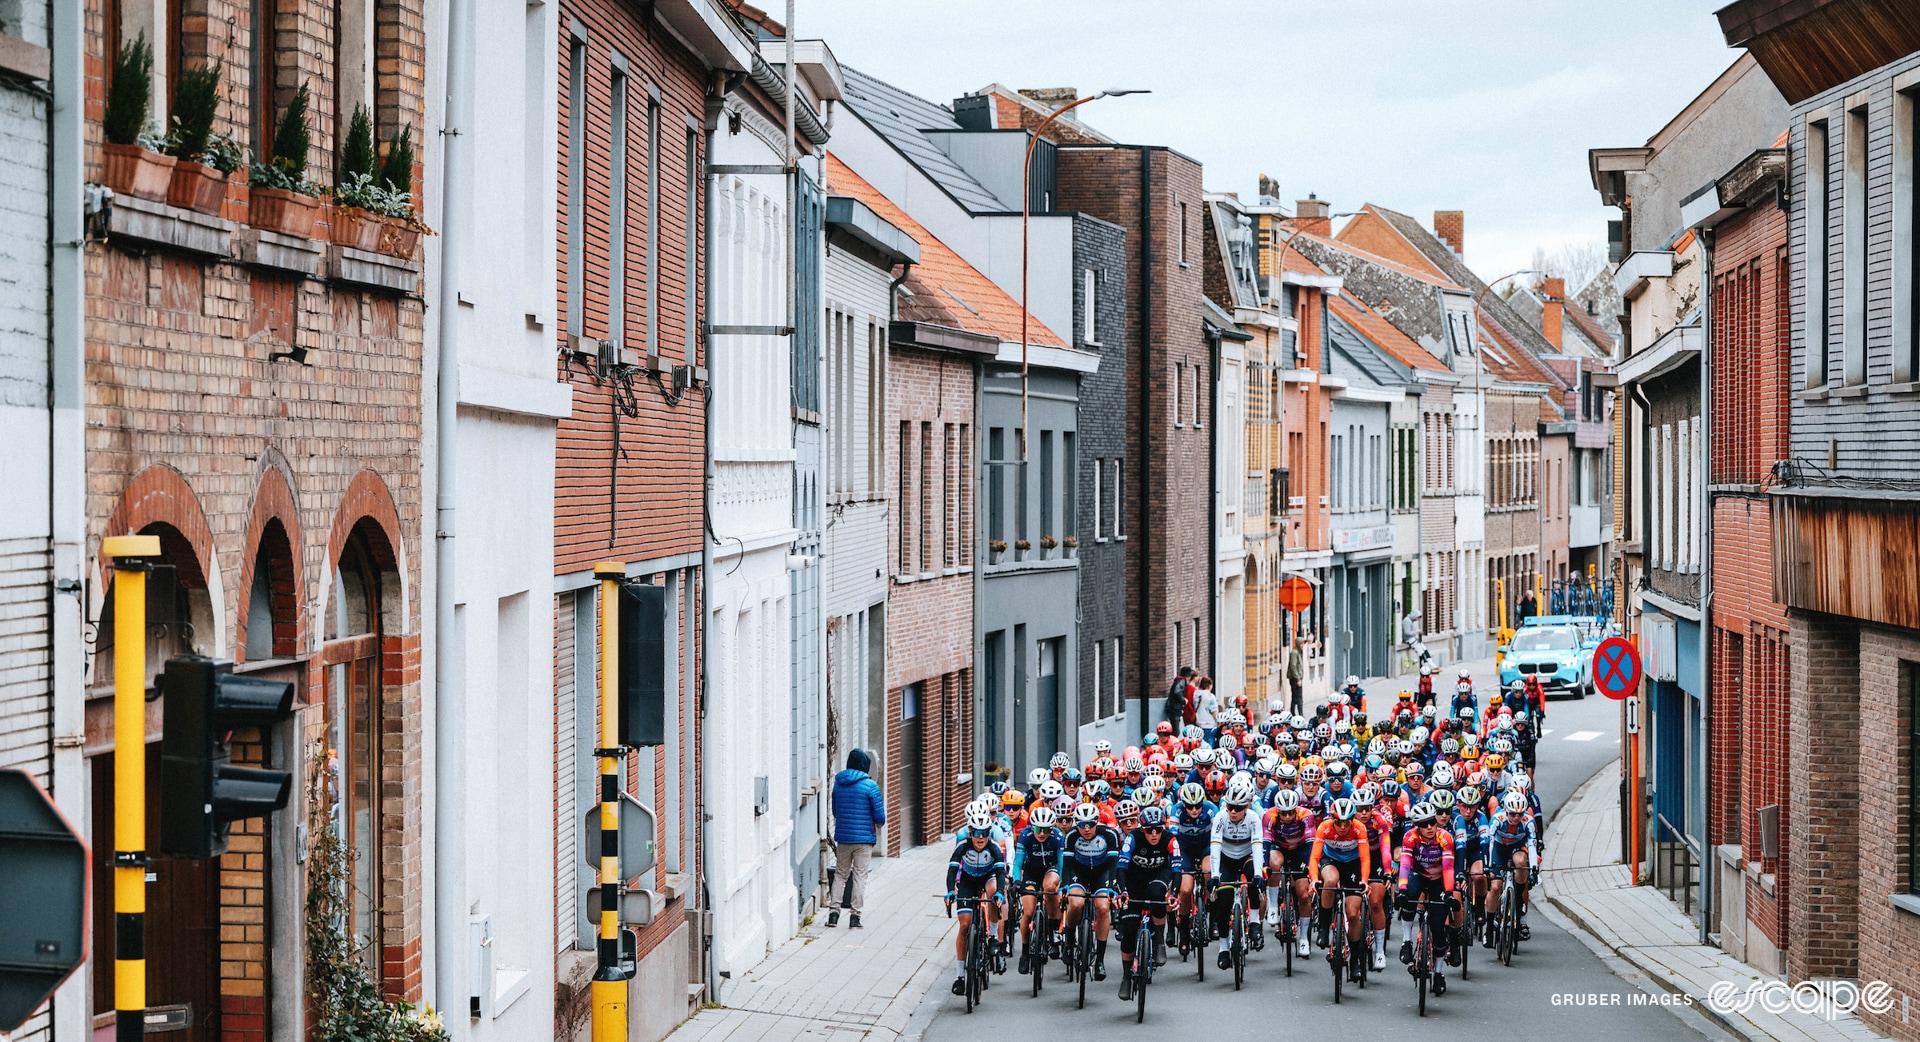 A peloton rides along, with buildings towering over them.